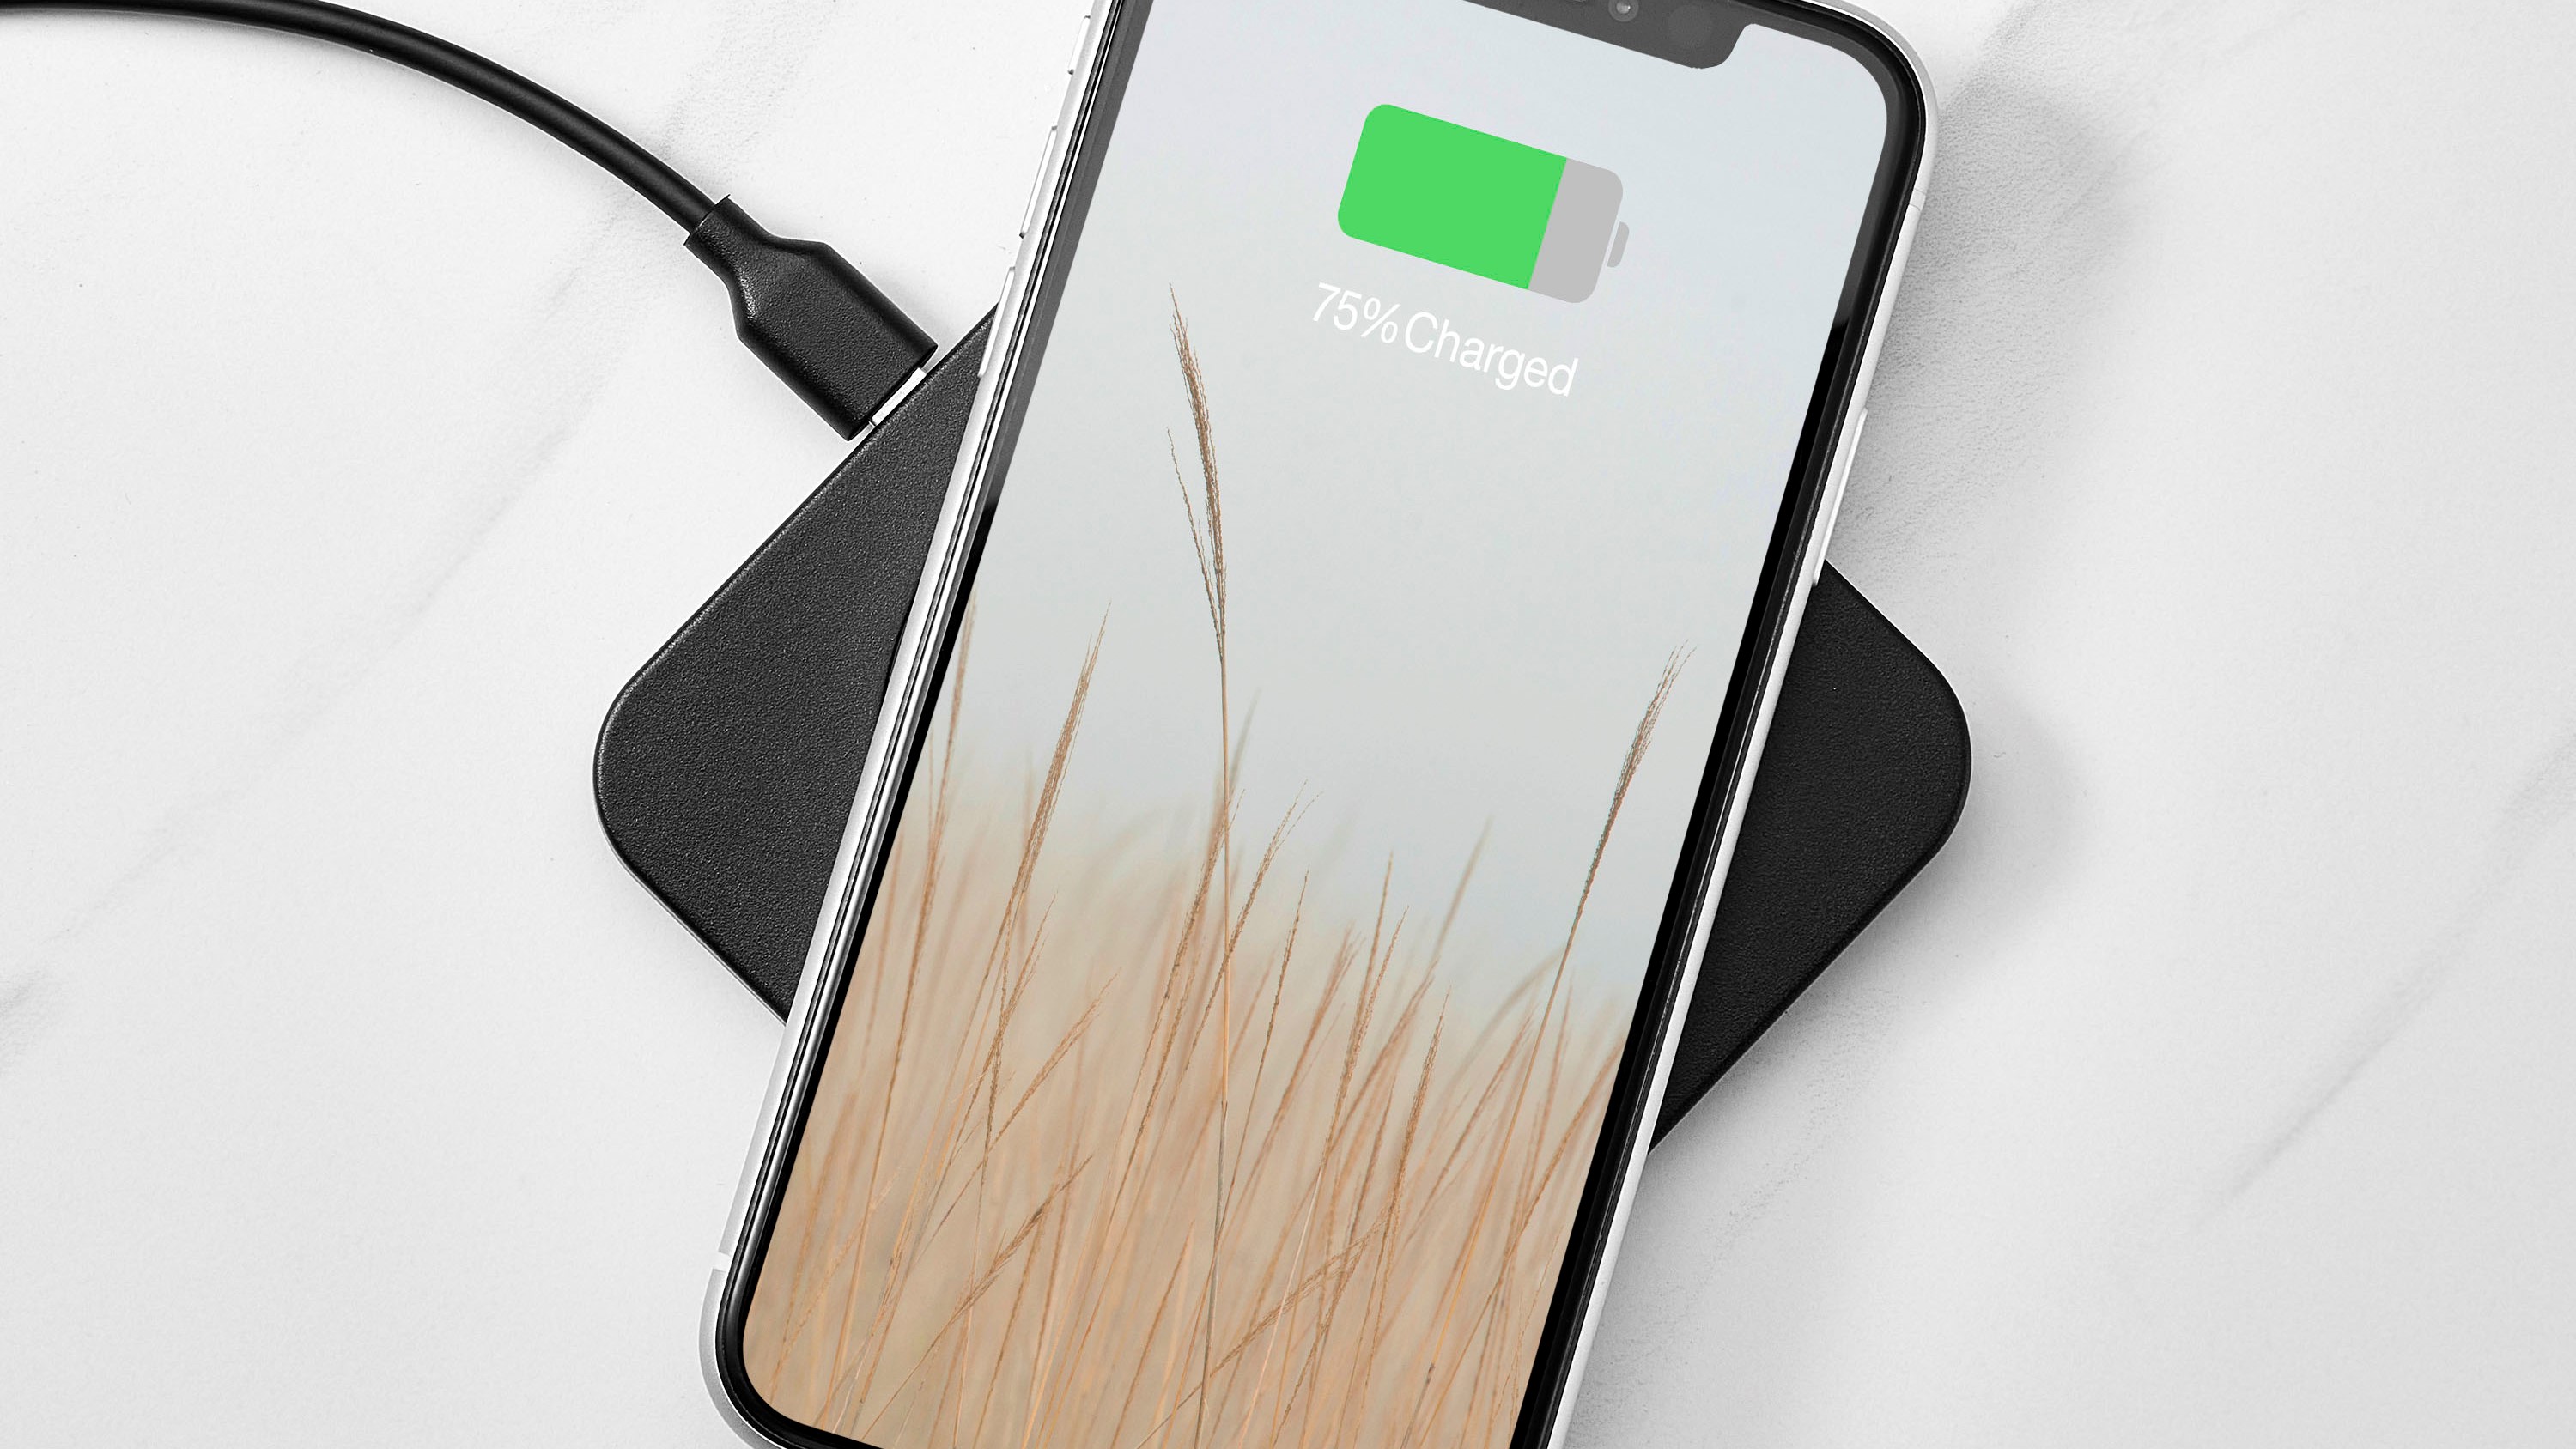 Insignia wireless charging pad in use